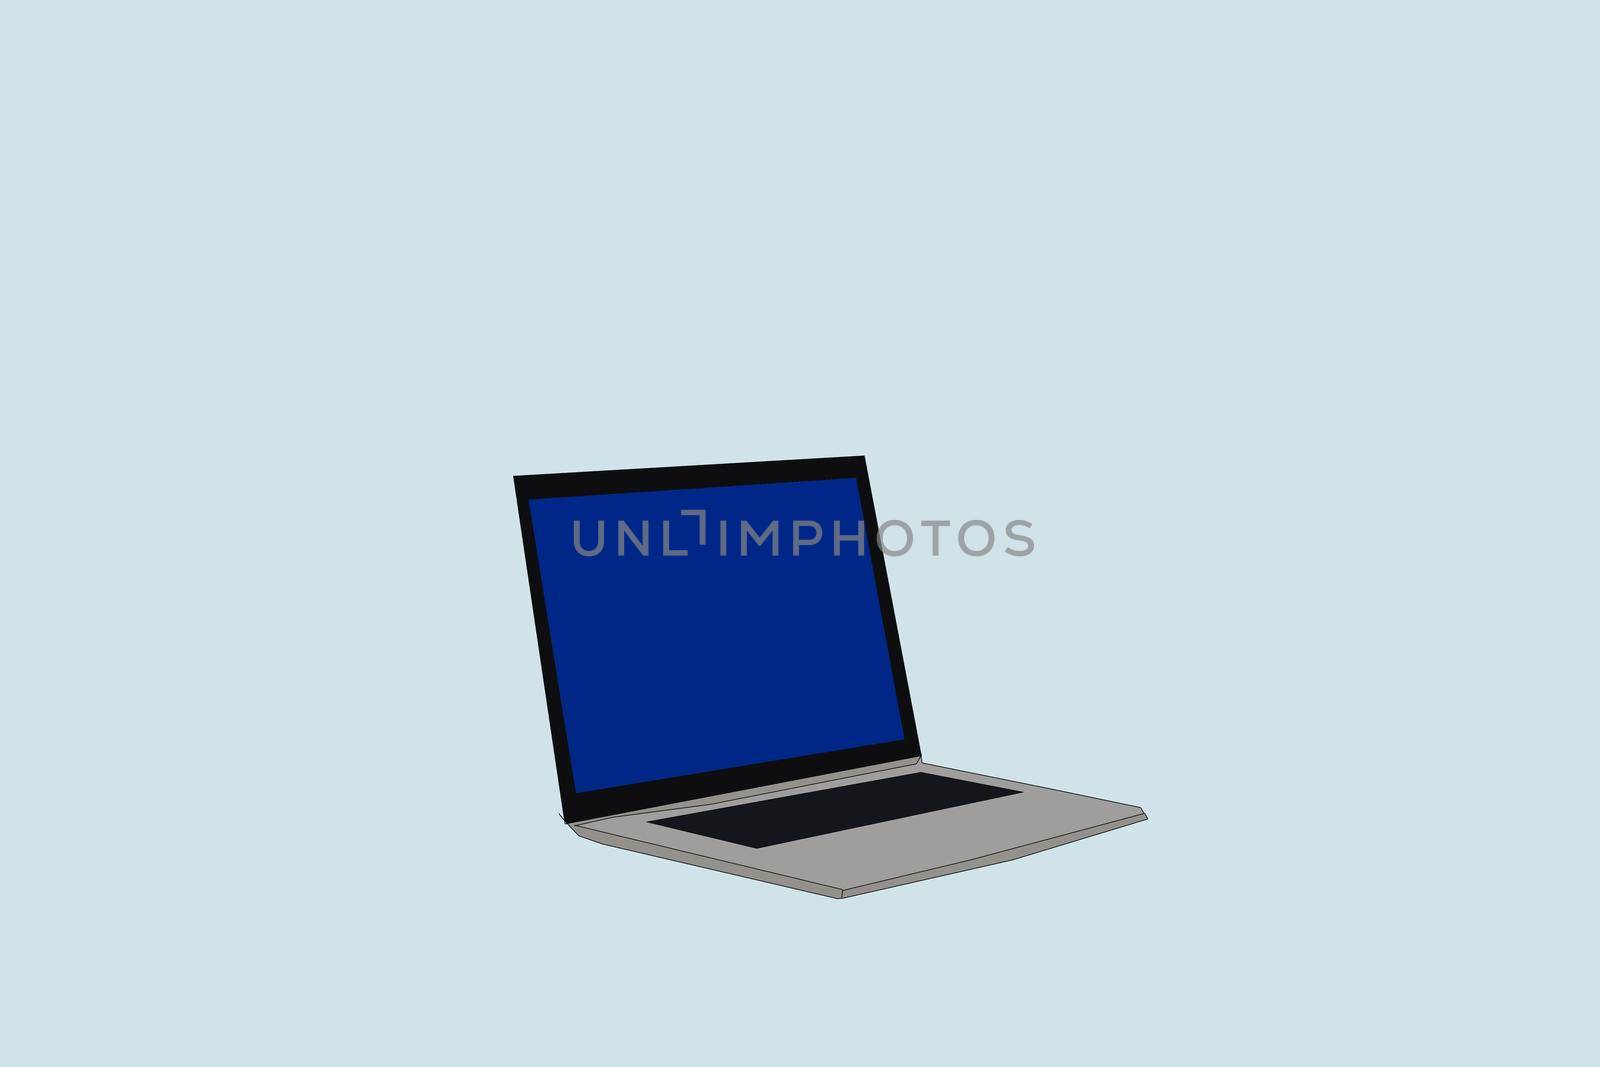 Isometric 3d illustration of open laptop isolated on blue background by Andelov13